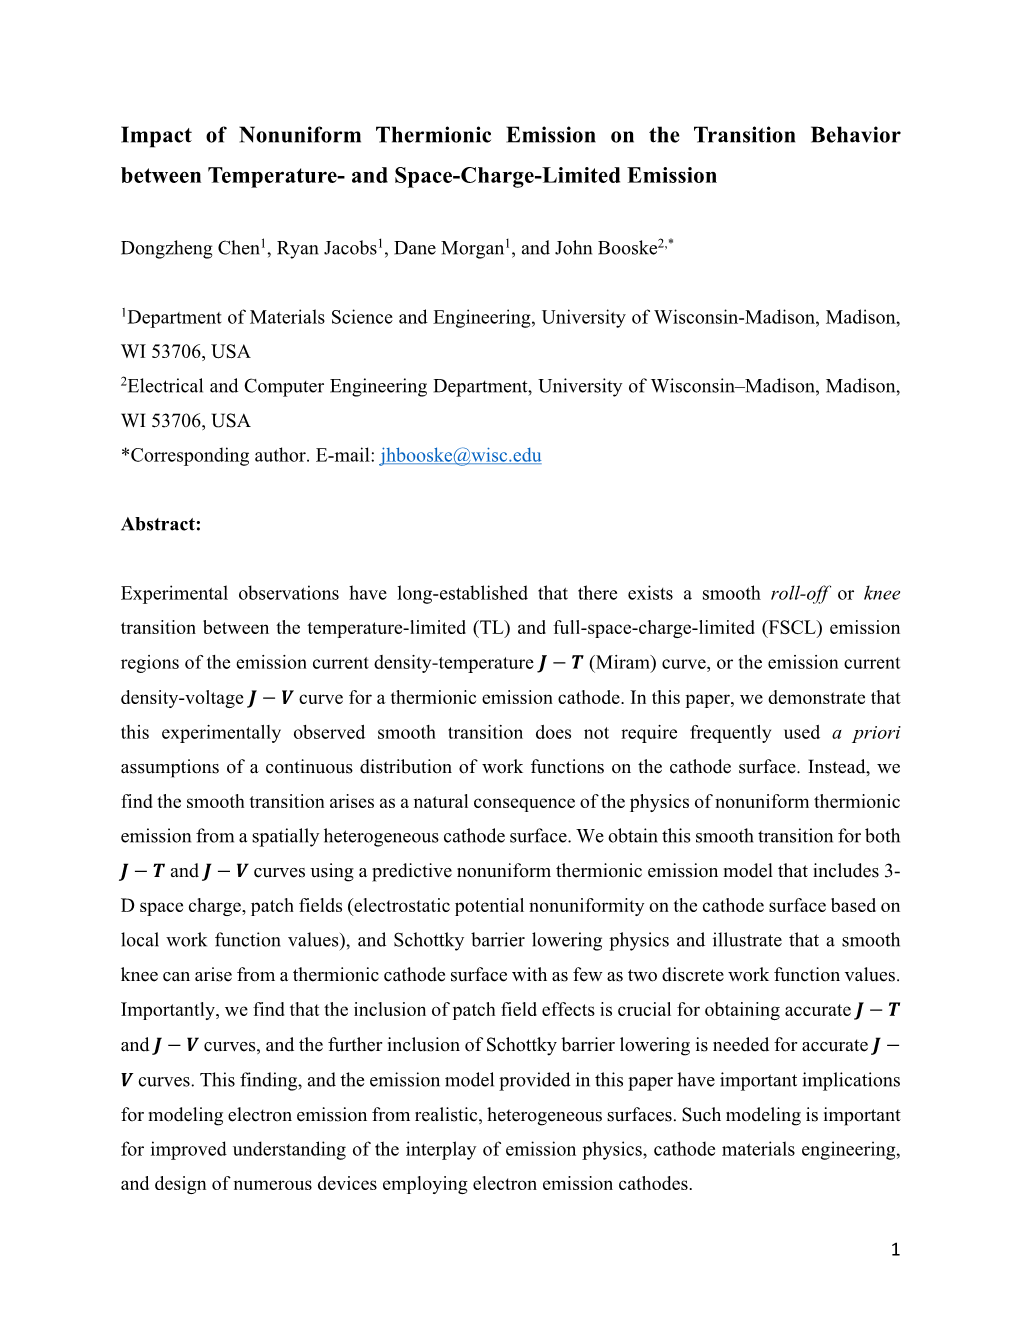 Impact of Nonuniform Thermionic Emission on the Transition Behavior Between Temperature- and Space-Charge-Limited Emission